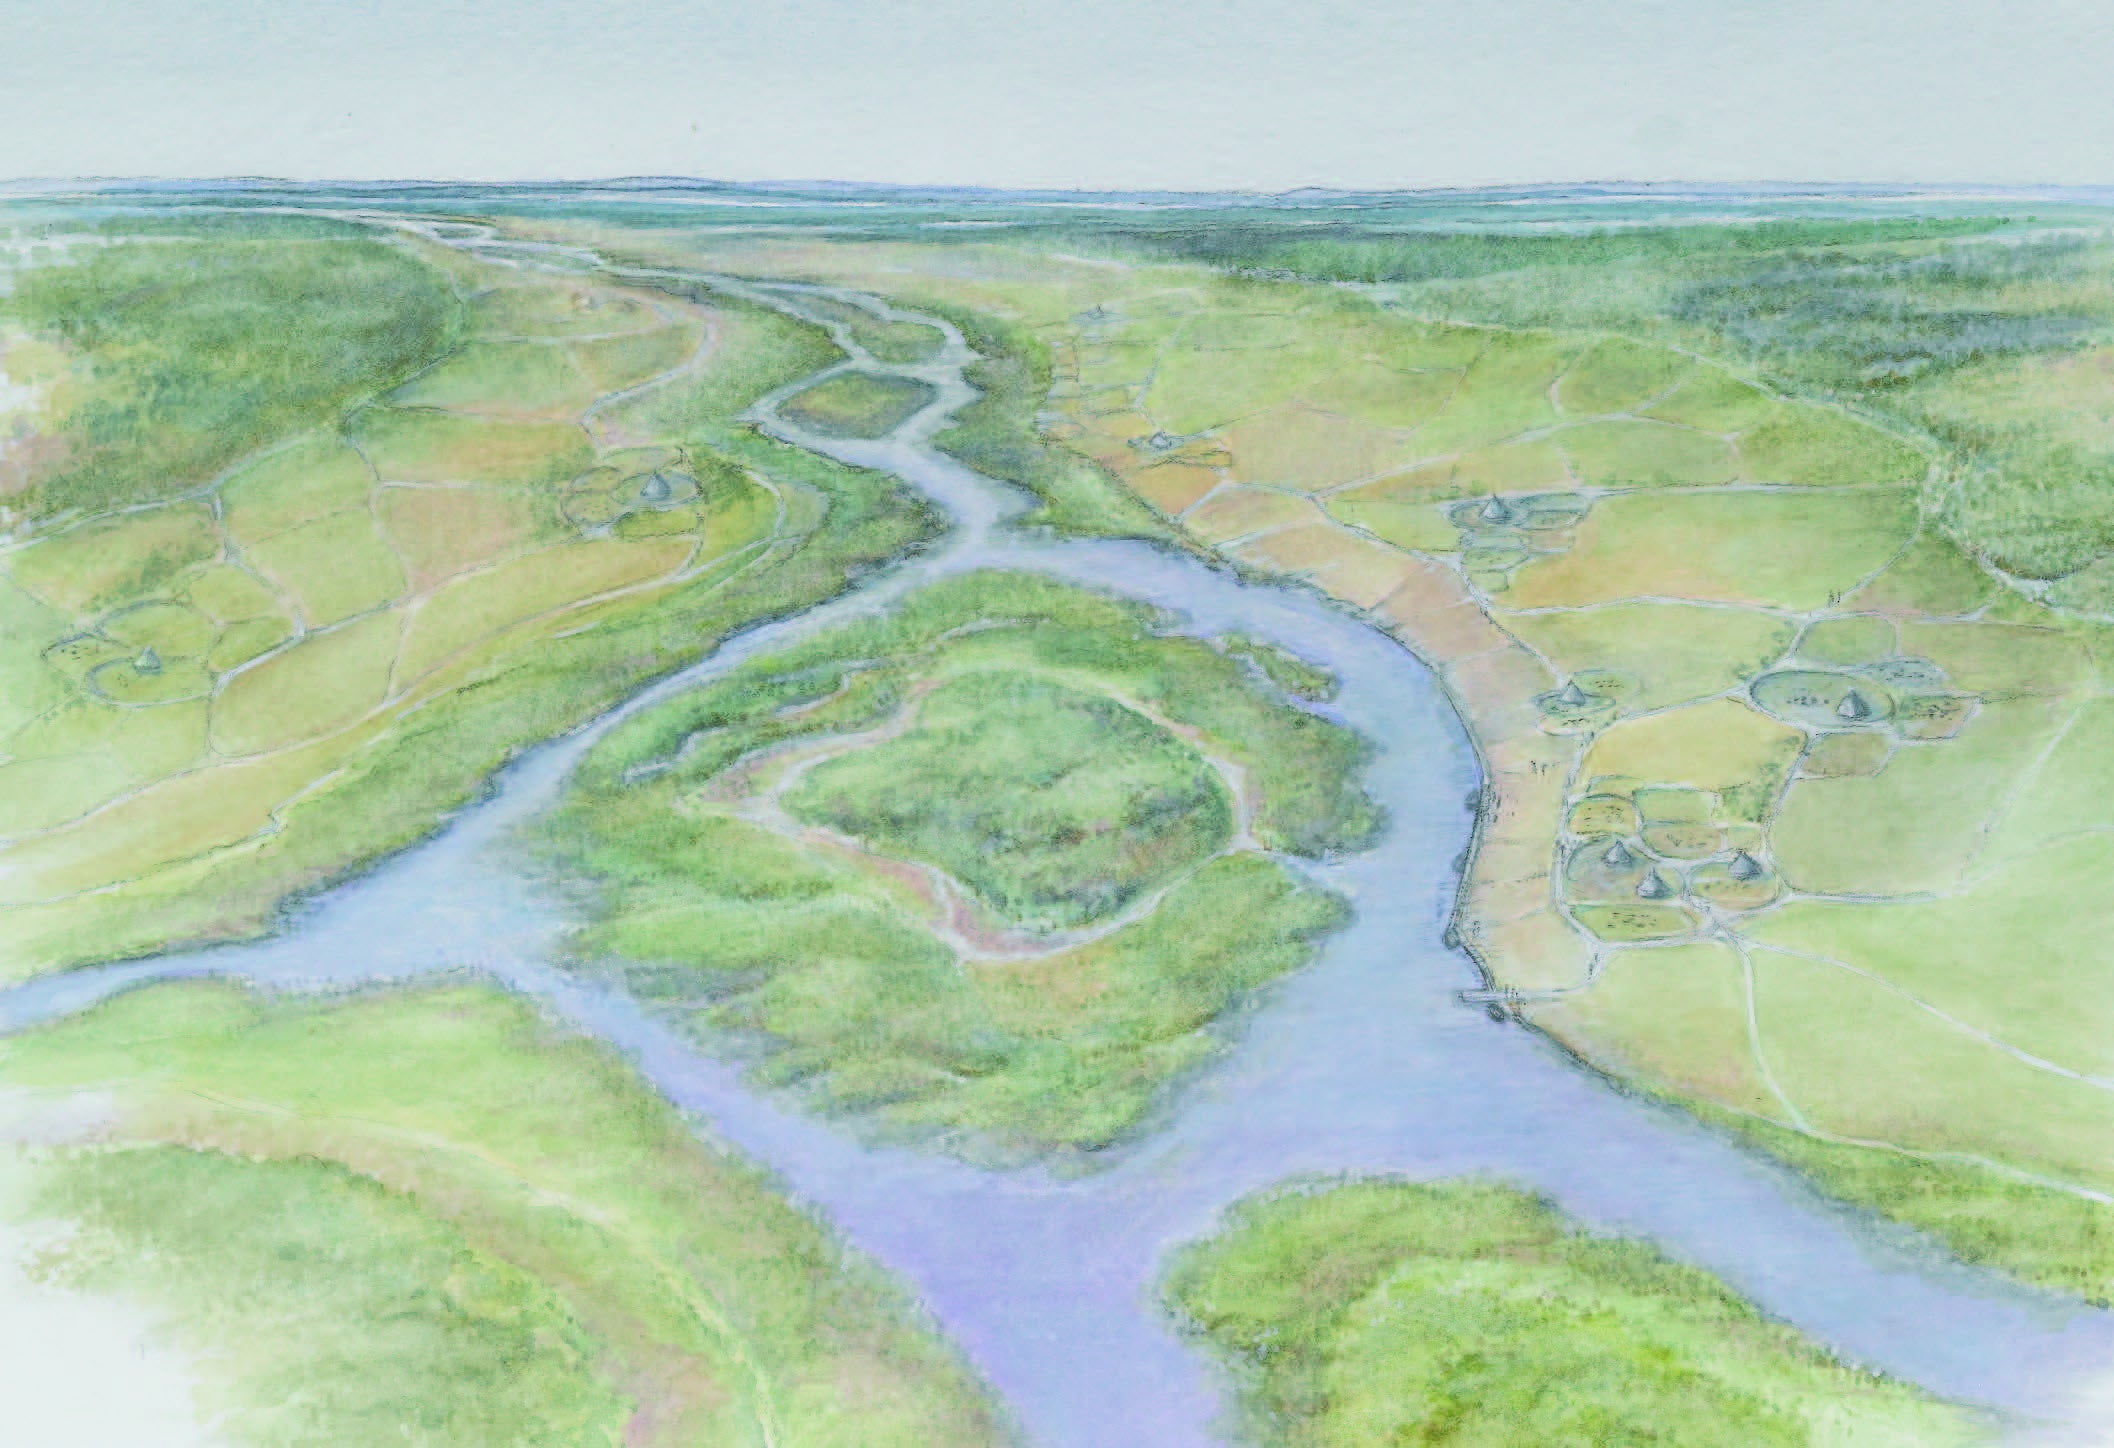 Reconstruction of the landscape around London's Lea Valley during the Mid Holocene period (Bronze Age), c3000 BP